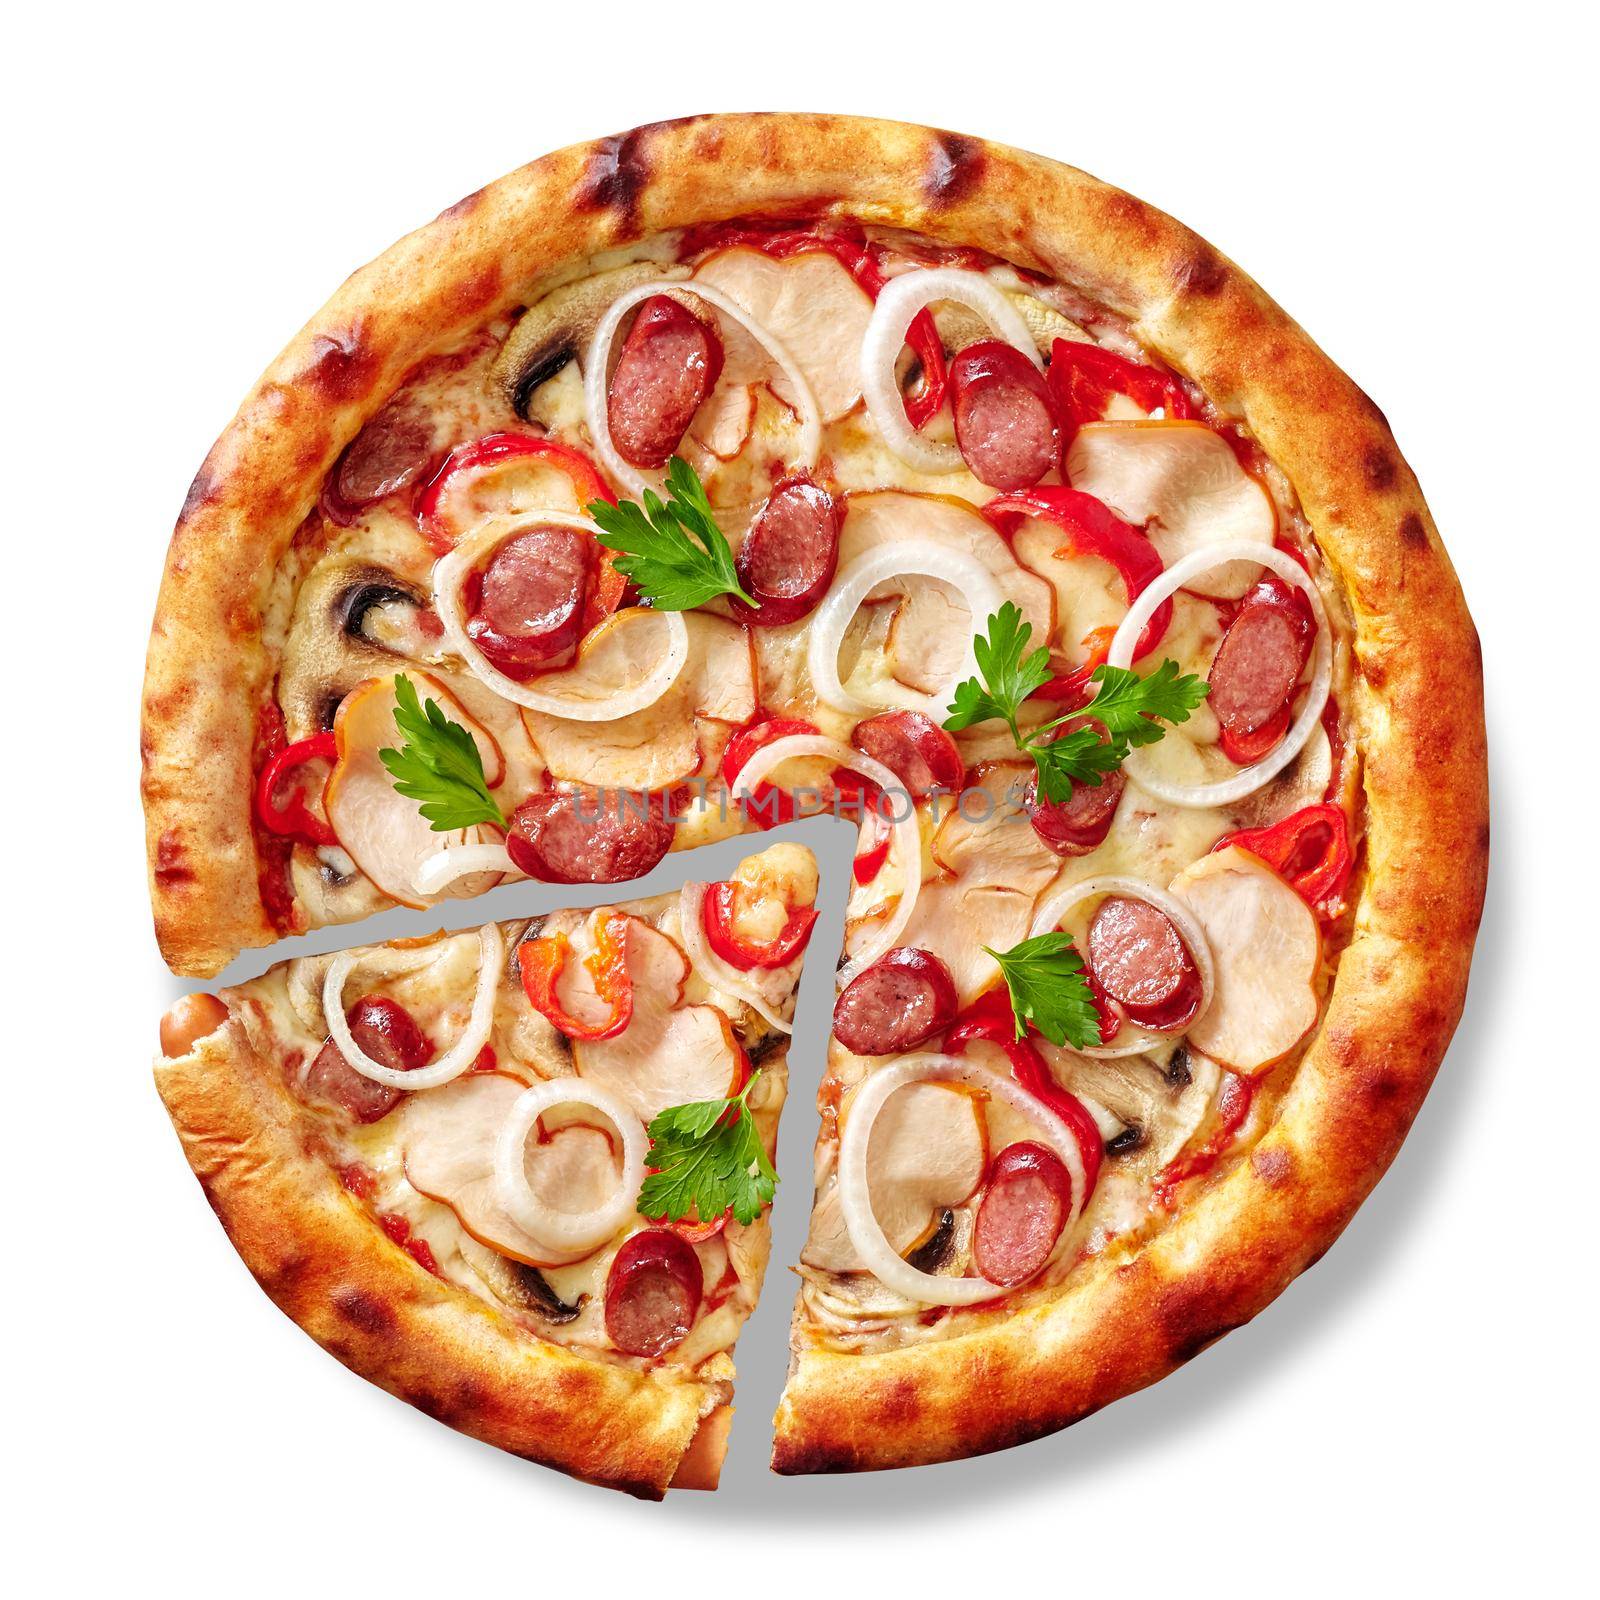 Top view of sliced appetizing pizza with Viennese sausages crust stuffed and filling of smoked chicken, hunting sausages, mushrooms, bell peppers, onions and fresh greens isolated on white background